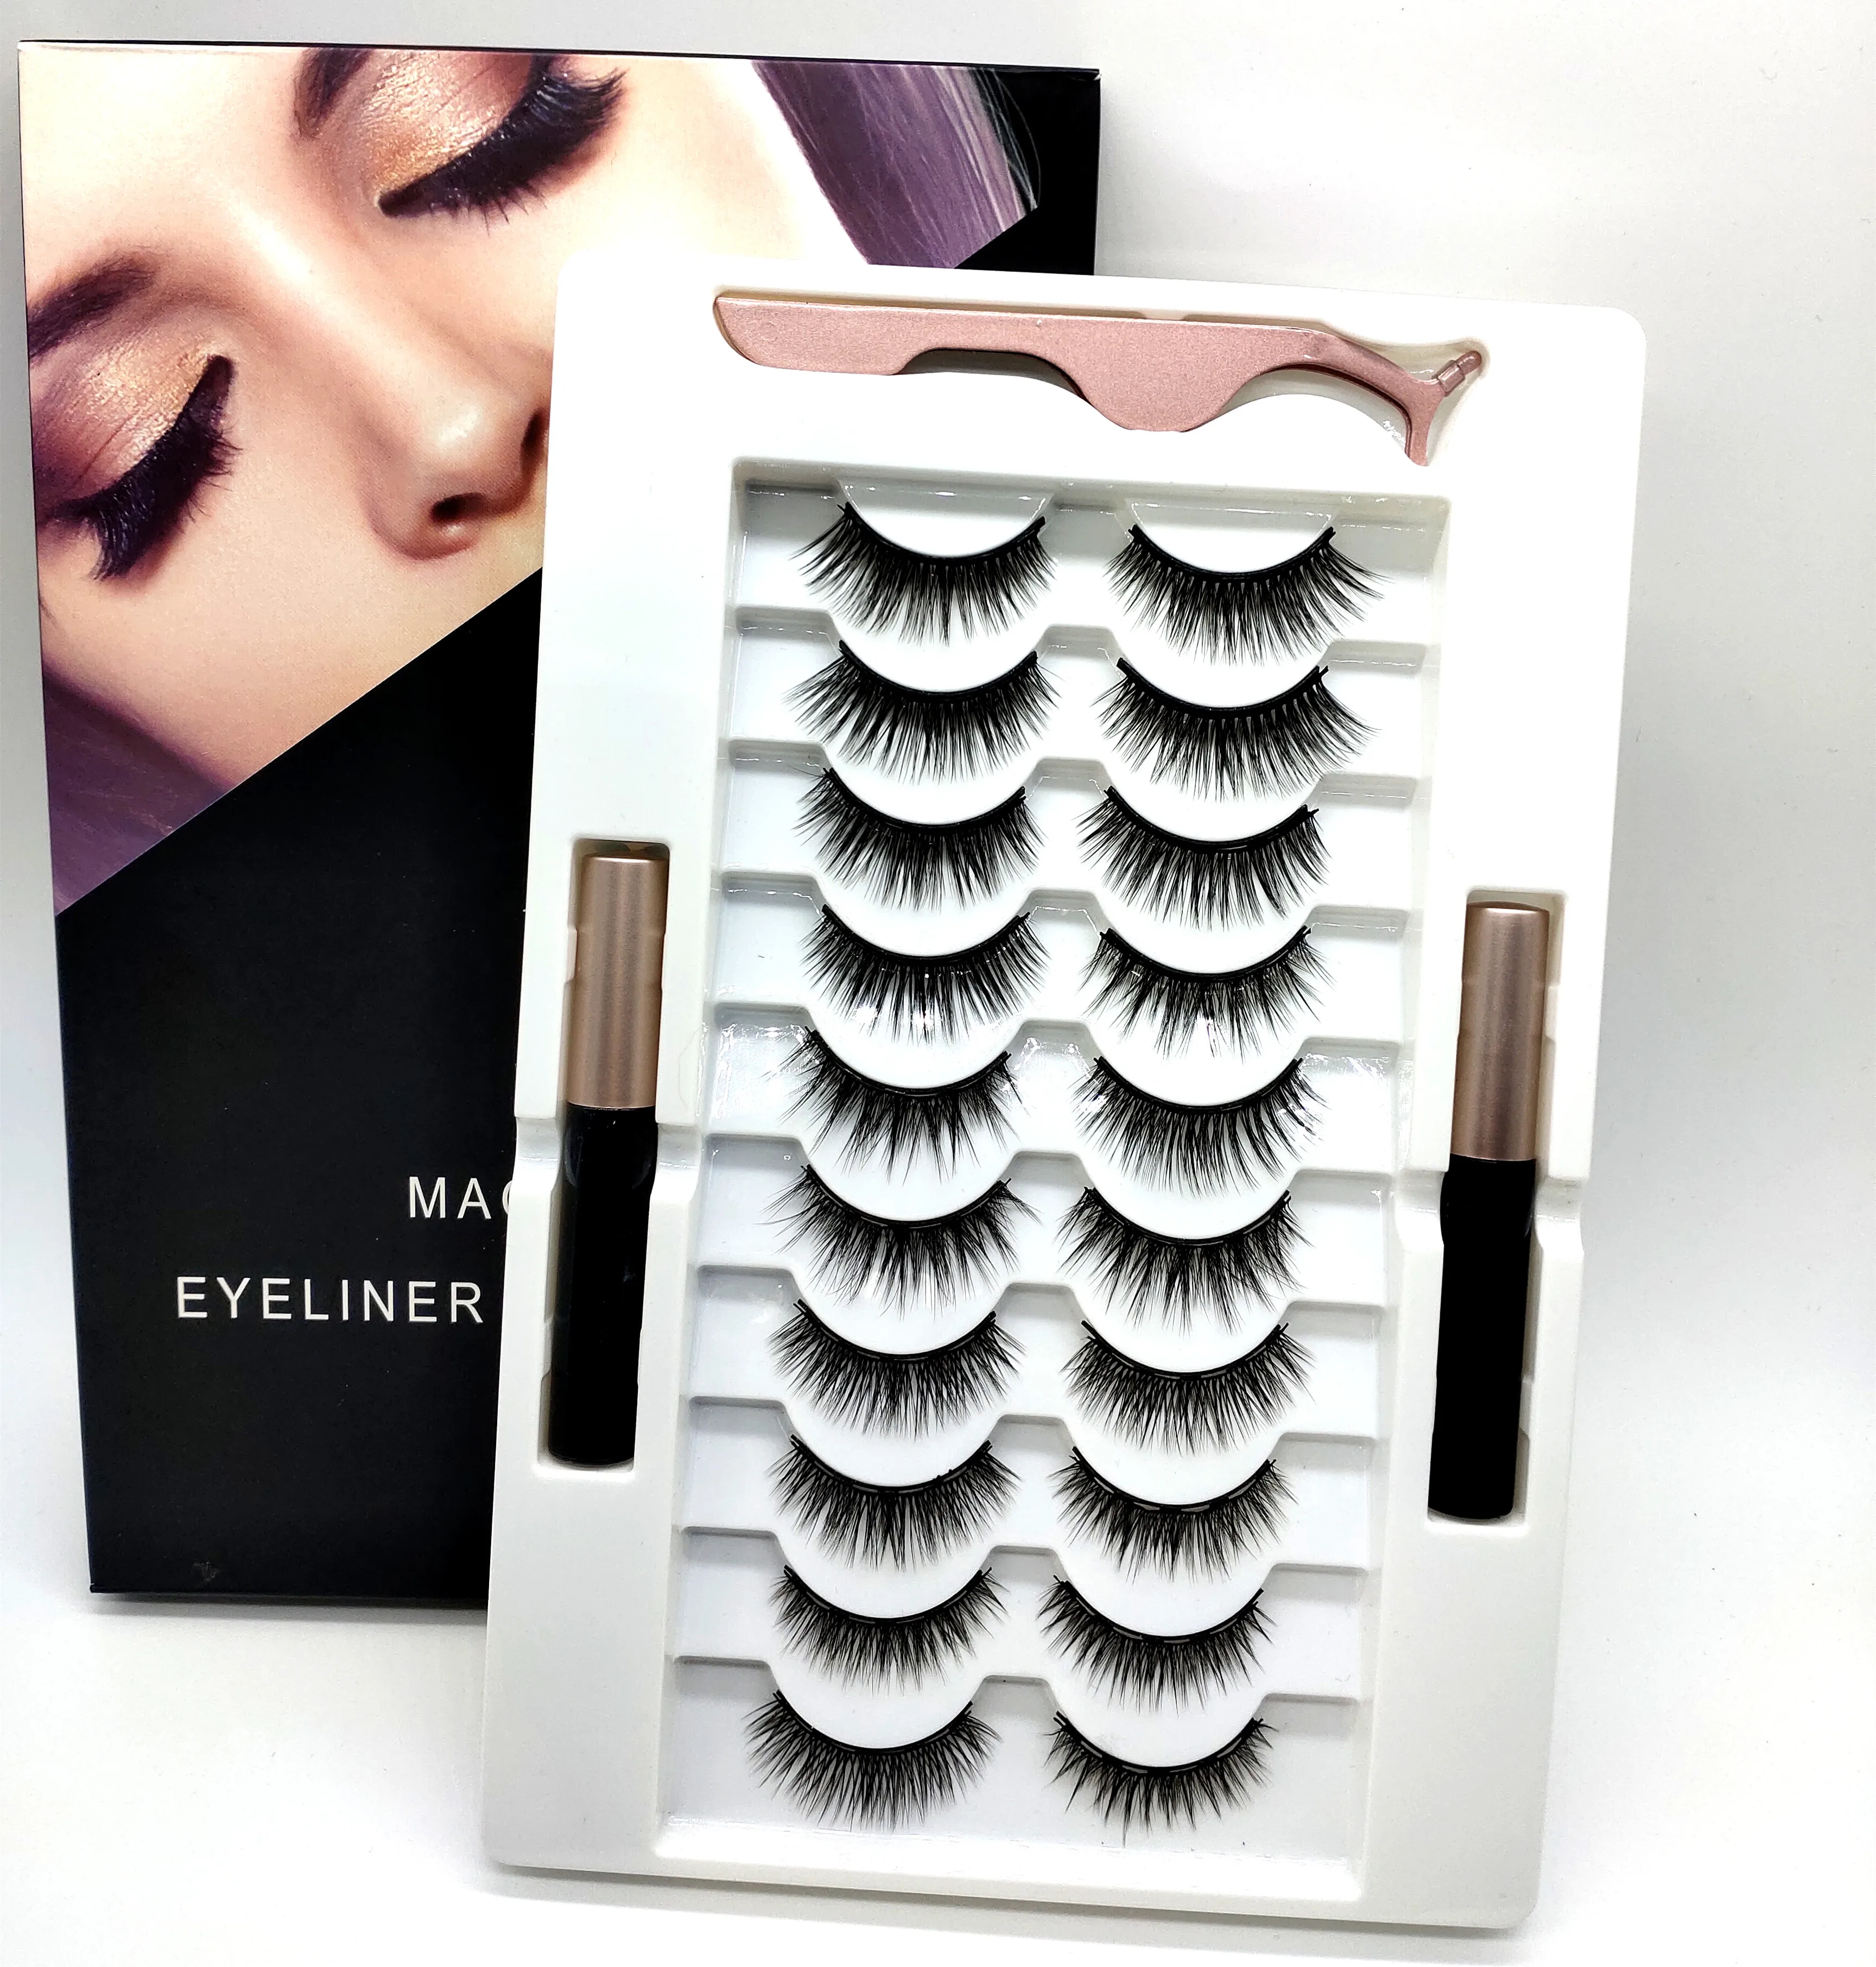 

2020 New Product No Glue Patent Technique Hot Magnetic Eyeliner Eyelashes Kits 10 Pairs in 1Tray Eyeliner Makeup Mirror Tweezer, Custom color